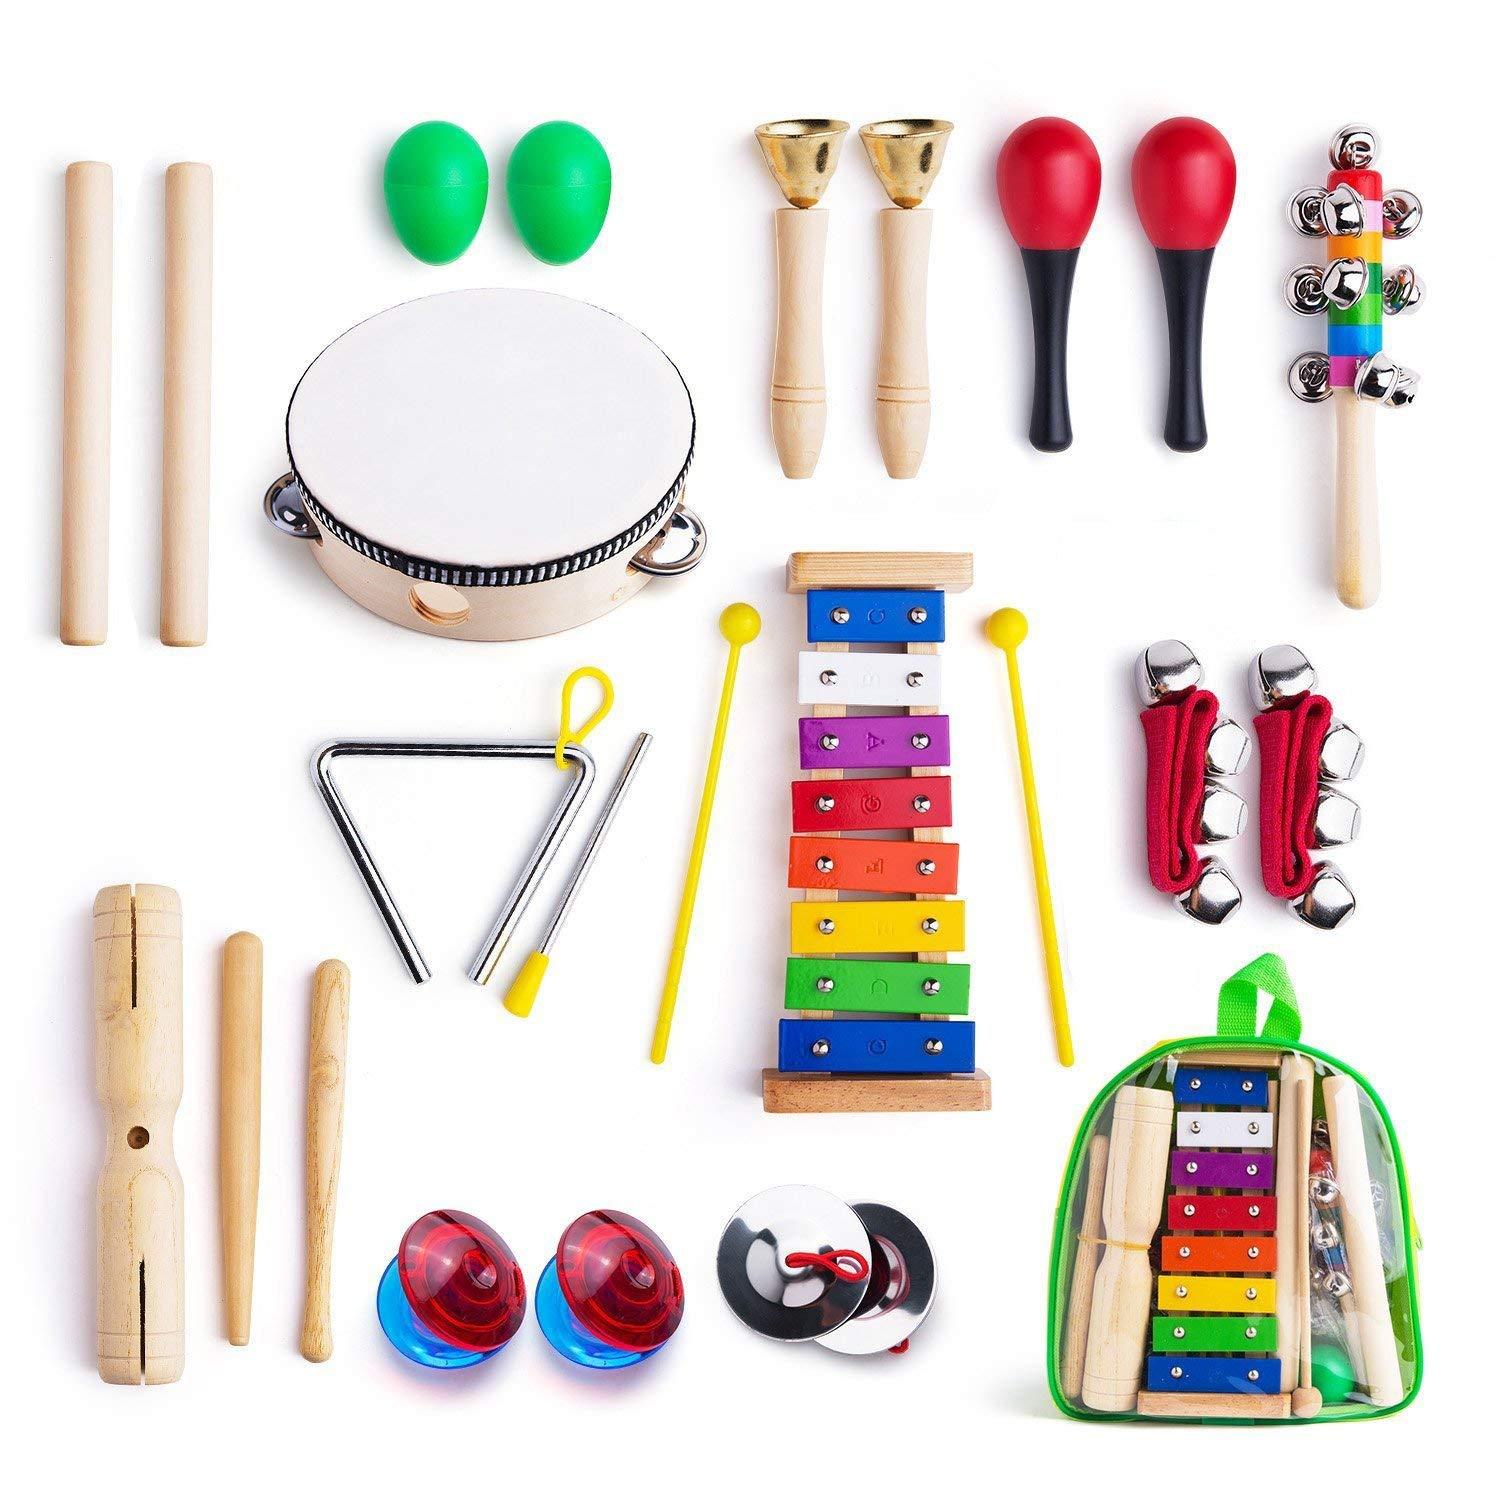 Ben-gi Kids Musical Instruments Tamborines Drum Set Xylophone Percussion Toy Set for Gifts Party 